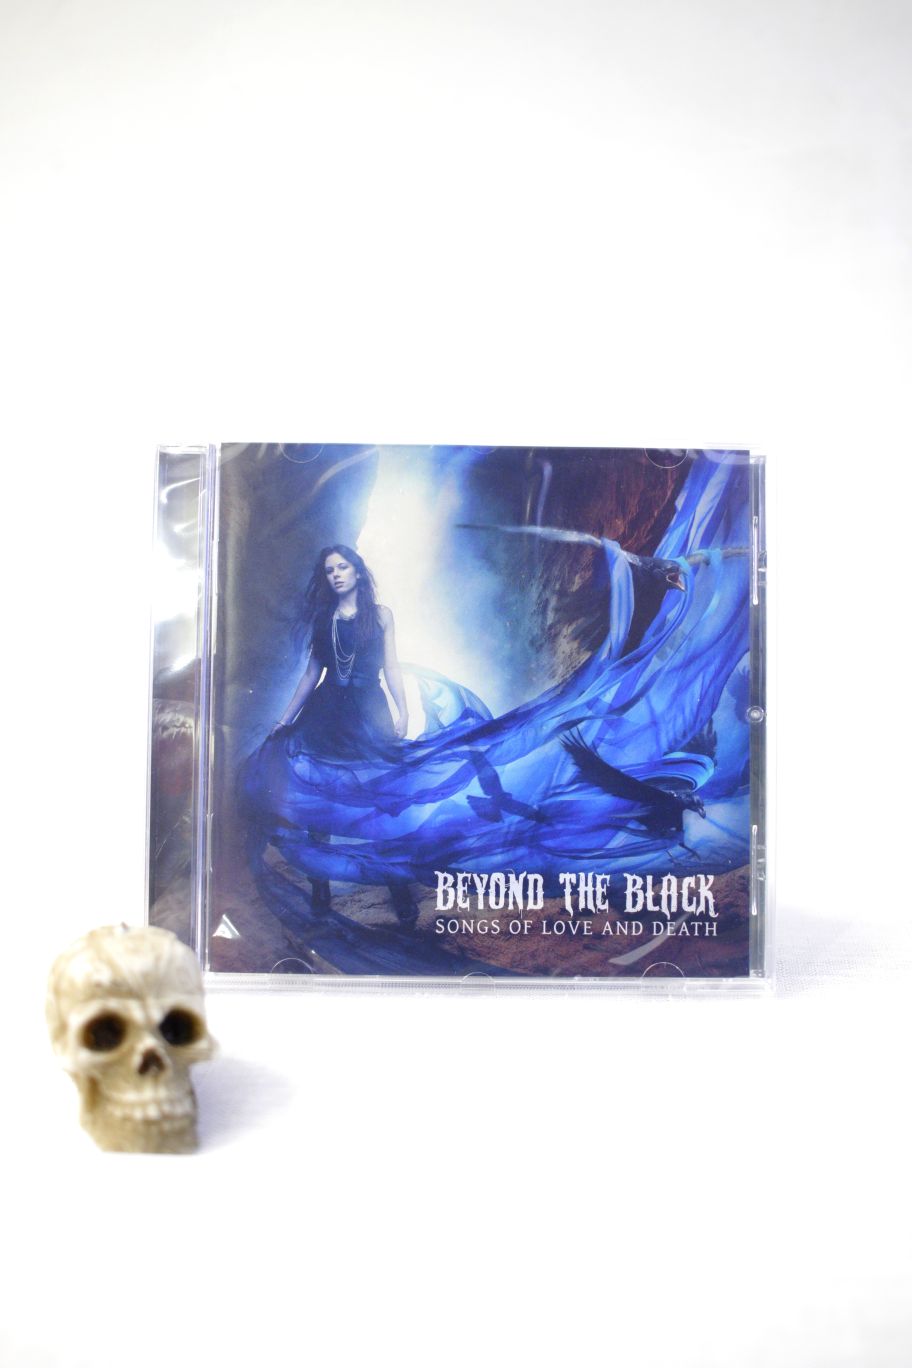 CD BEYOND THE BLACK SONGS OF LOVE AND DEATH